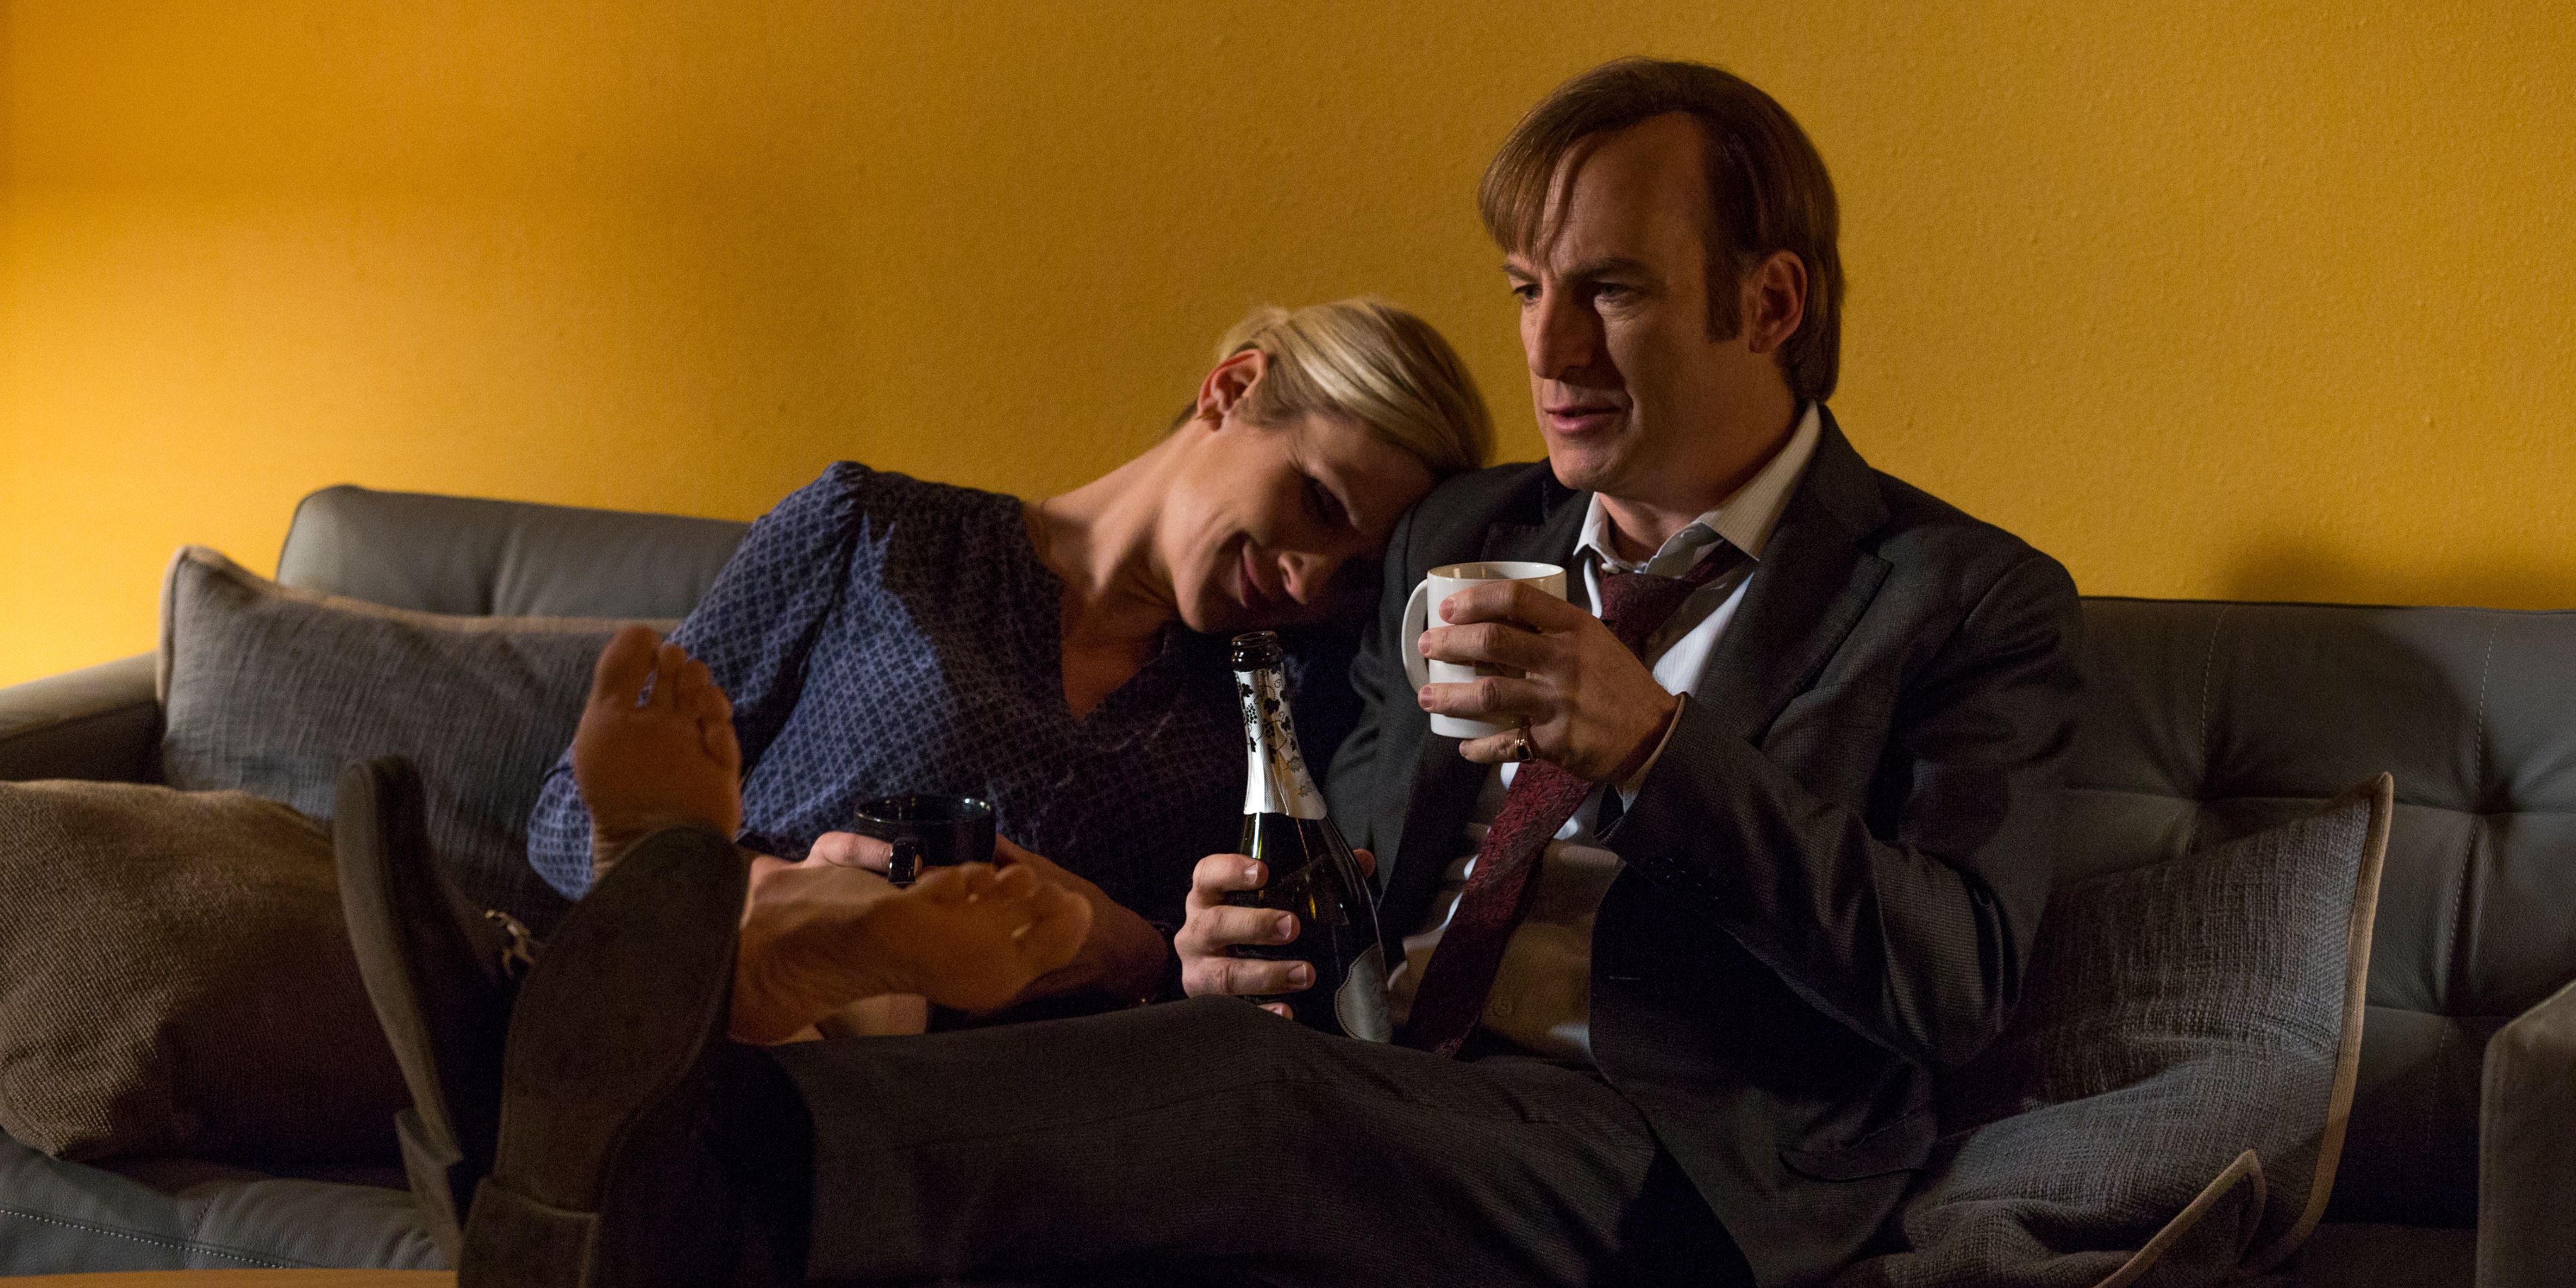 Jimmy informs Kim that he'll now go by the name Saul Goodman in Better Call Saul